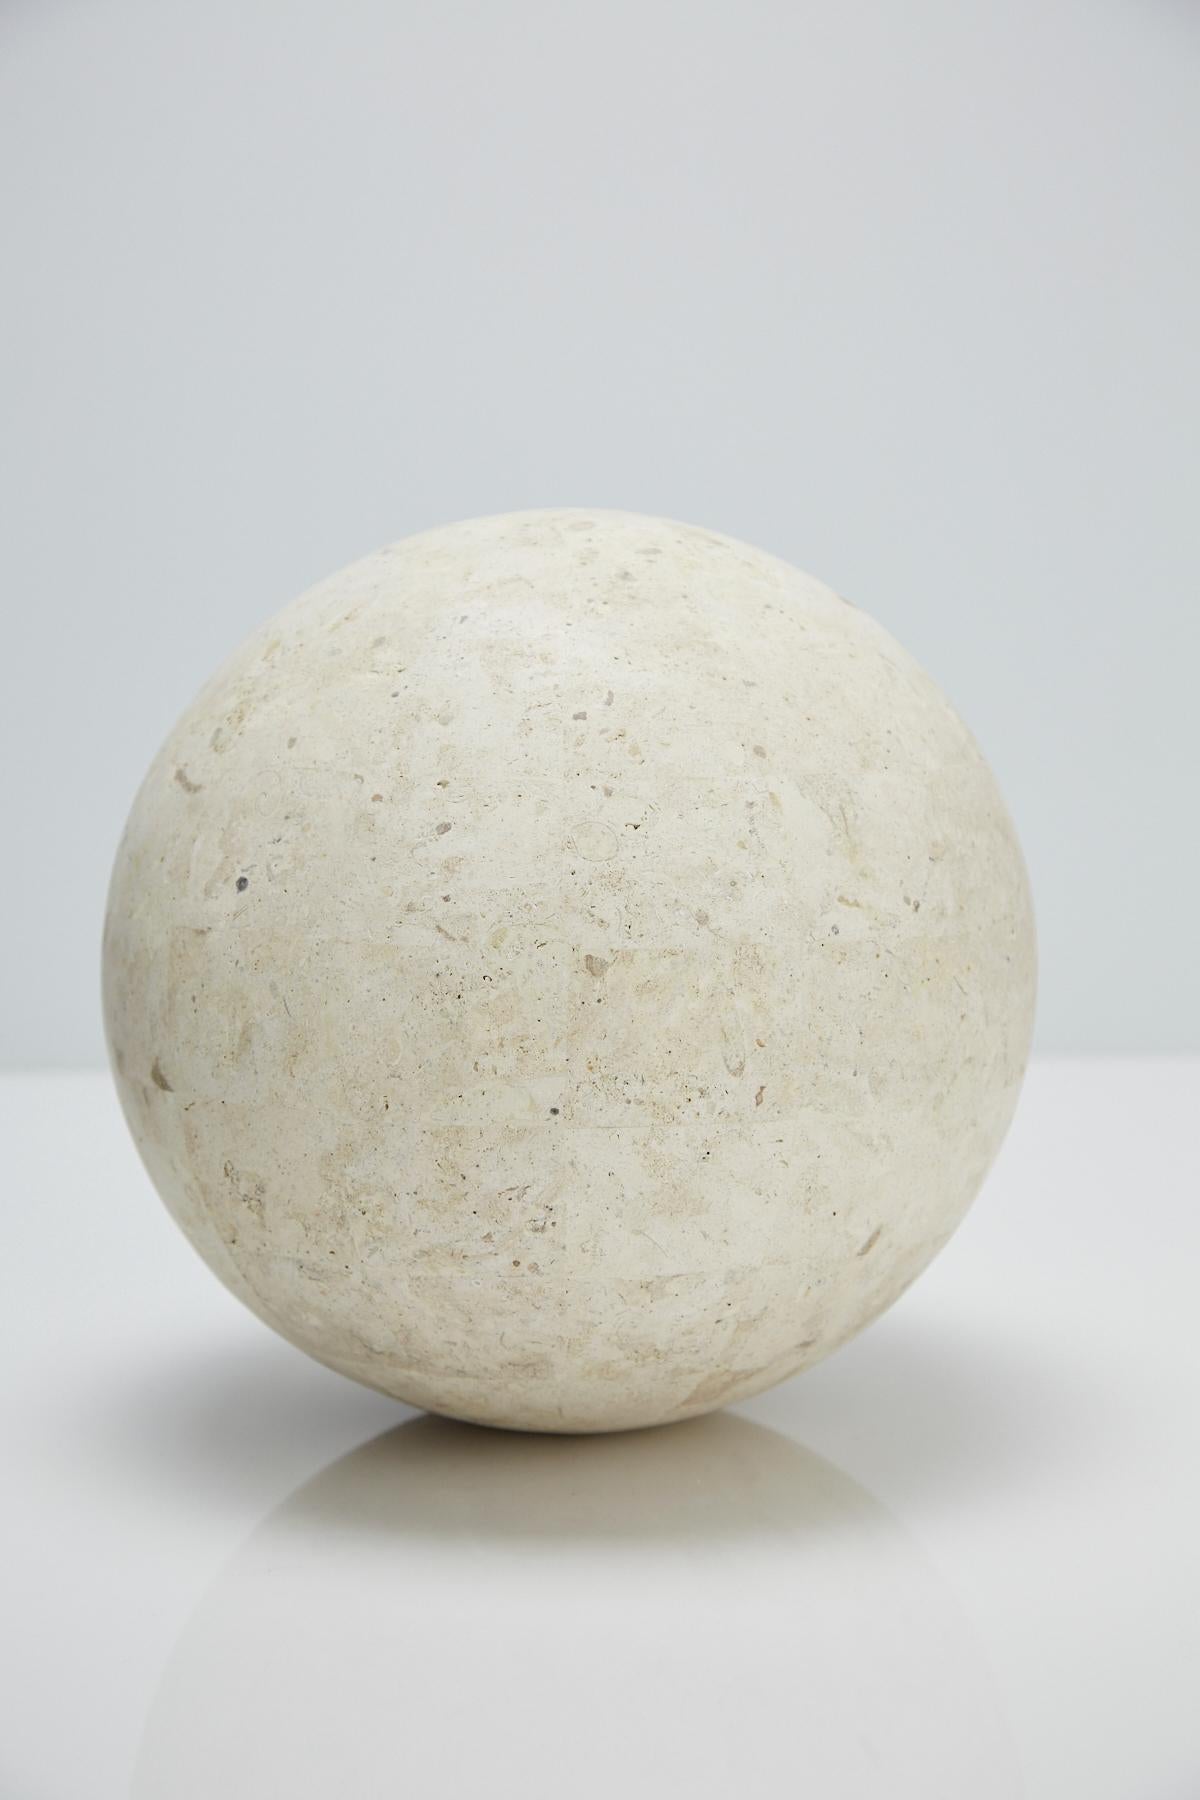 Post-Modern Large Tessellated Matte Mactan Stone Sphere - 10.5 in. Diameter For Sale